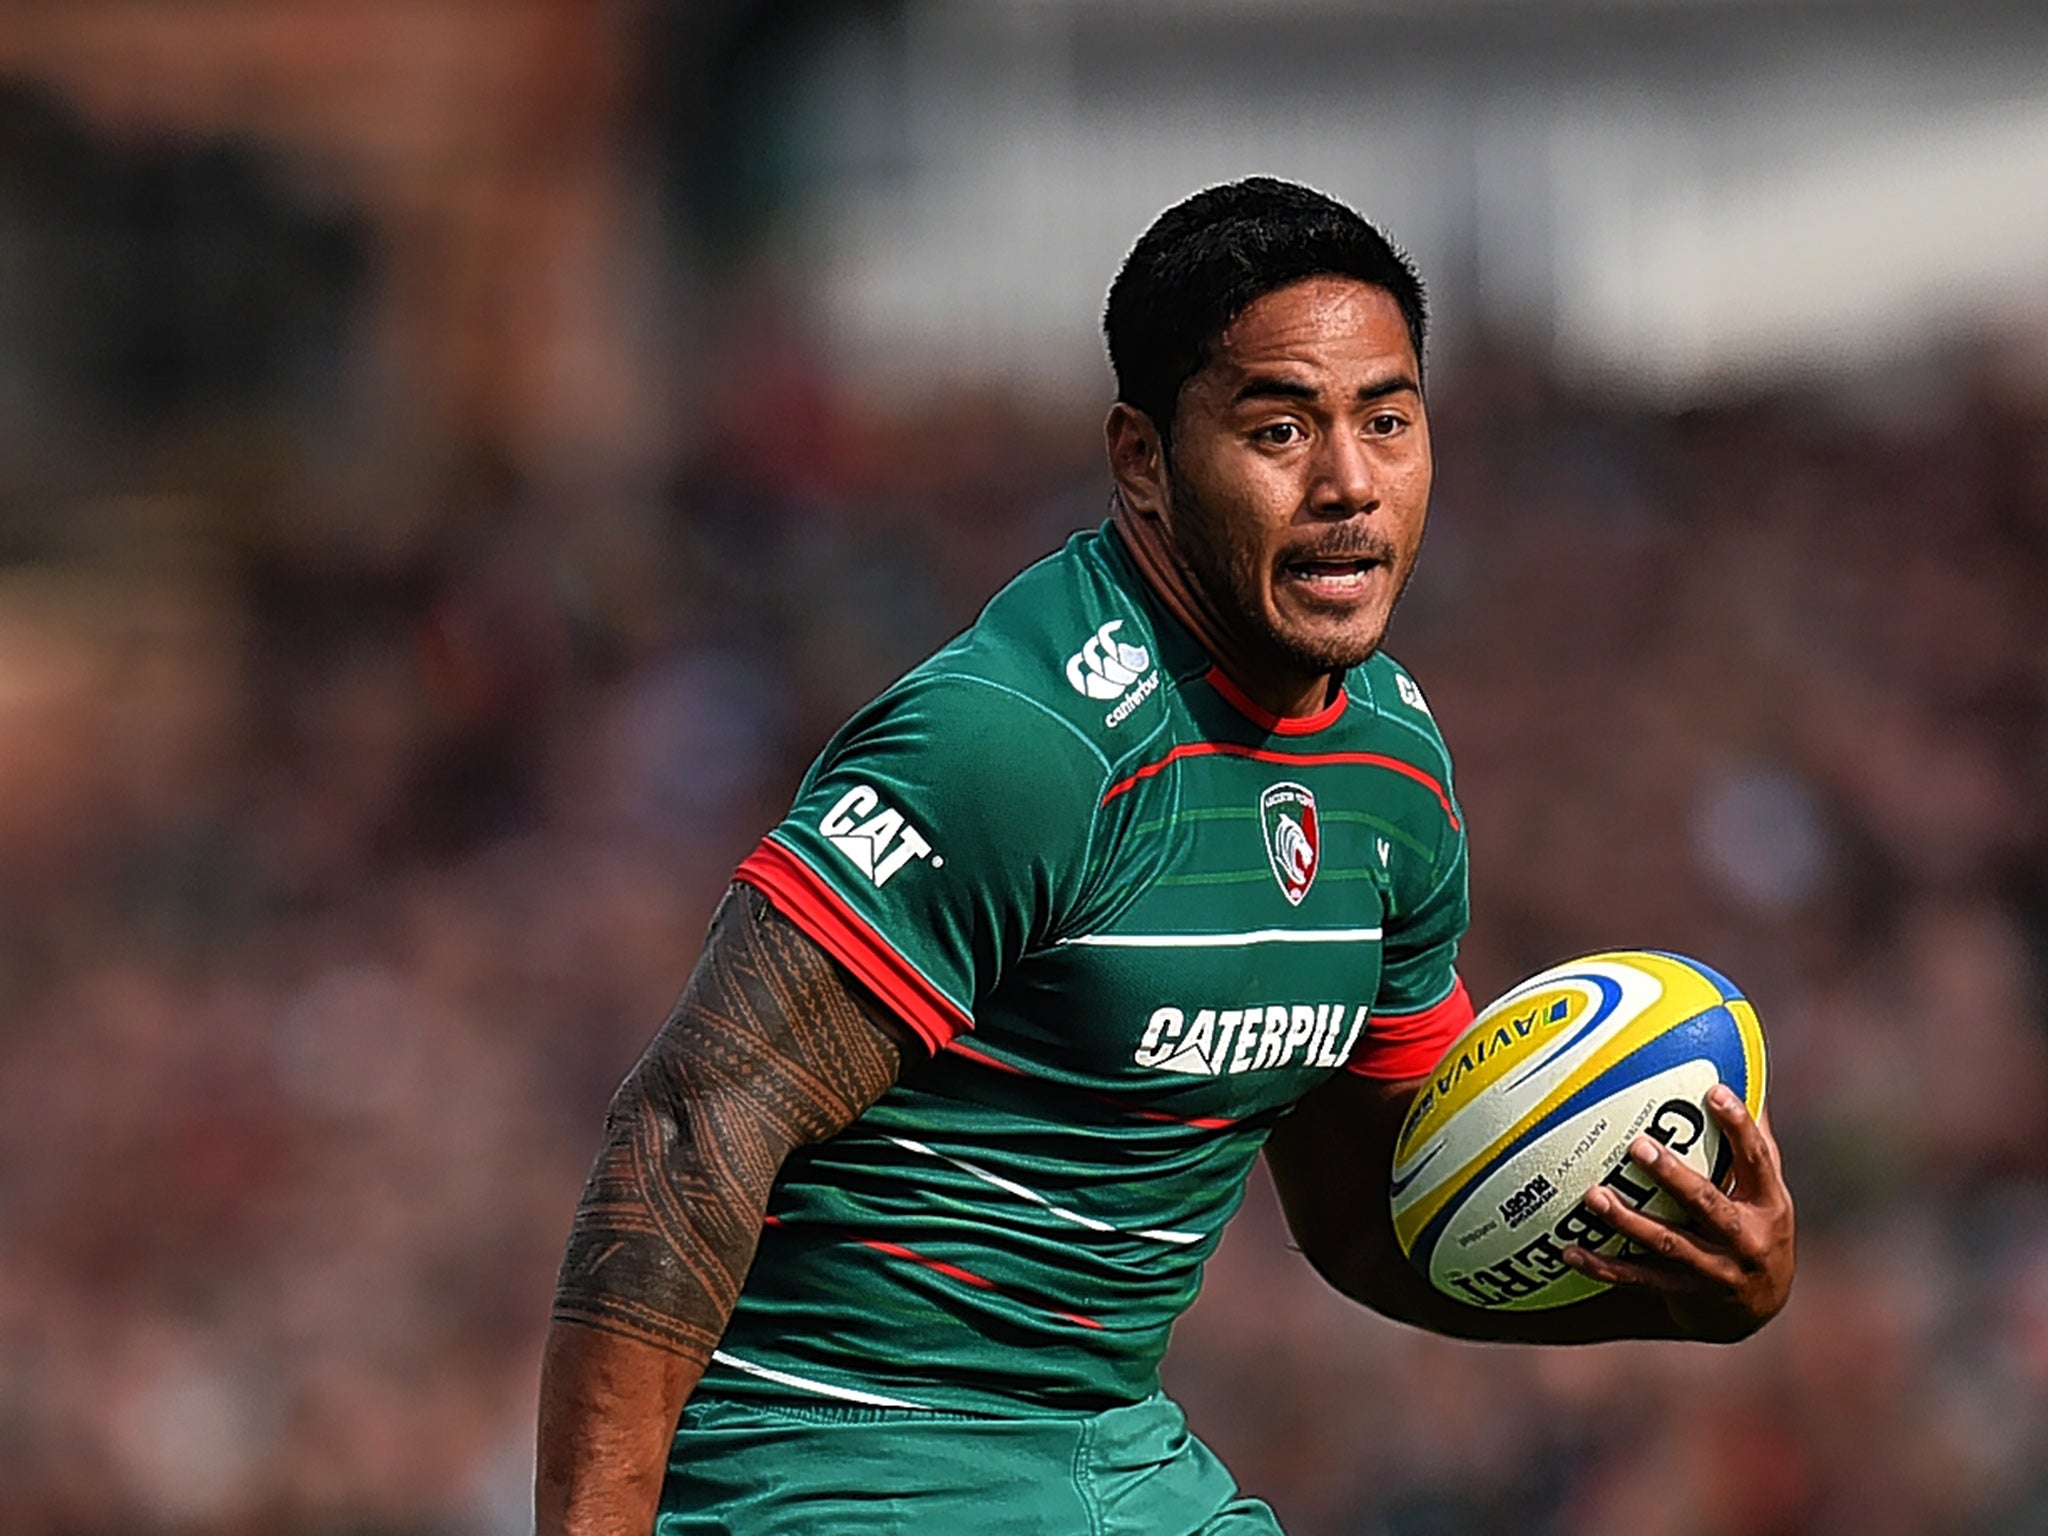 Leicester's Manu Tuilagi is the highest paid player in the Premiership with wages of £425,000 per year